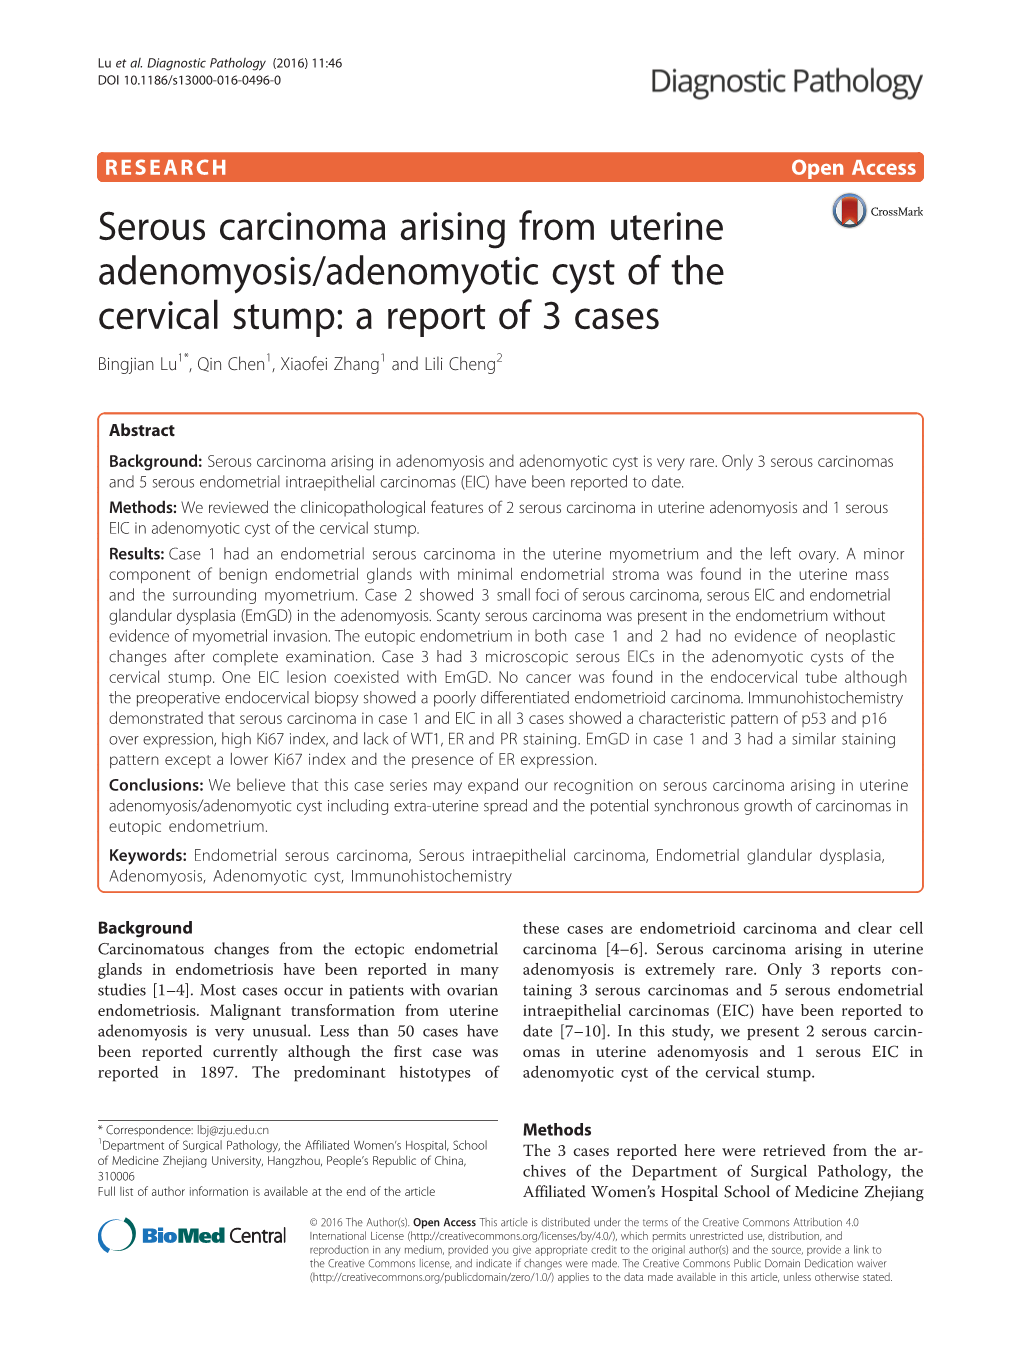 Serous Carcinoma Arising from Uterine Adenomyosis/Adenomyotic Cyst of the Cervical Stump: a Report of 3 Cases Bingjian Lu1*, Qin Chen1, Xiaofei Zhang1 and Lili Cheng2